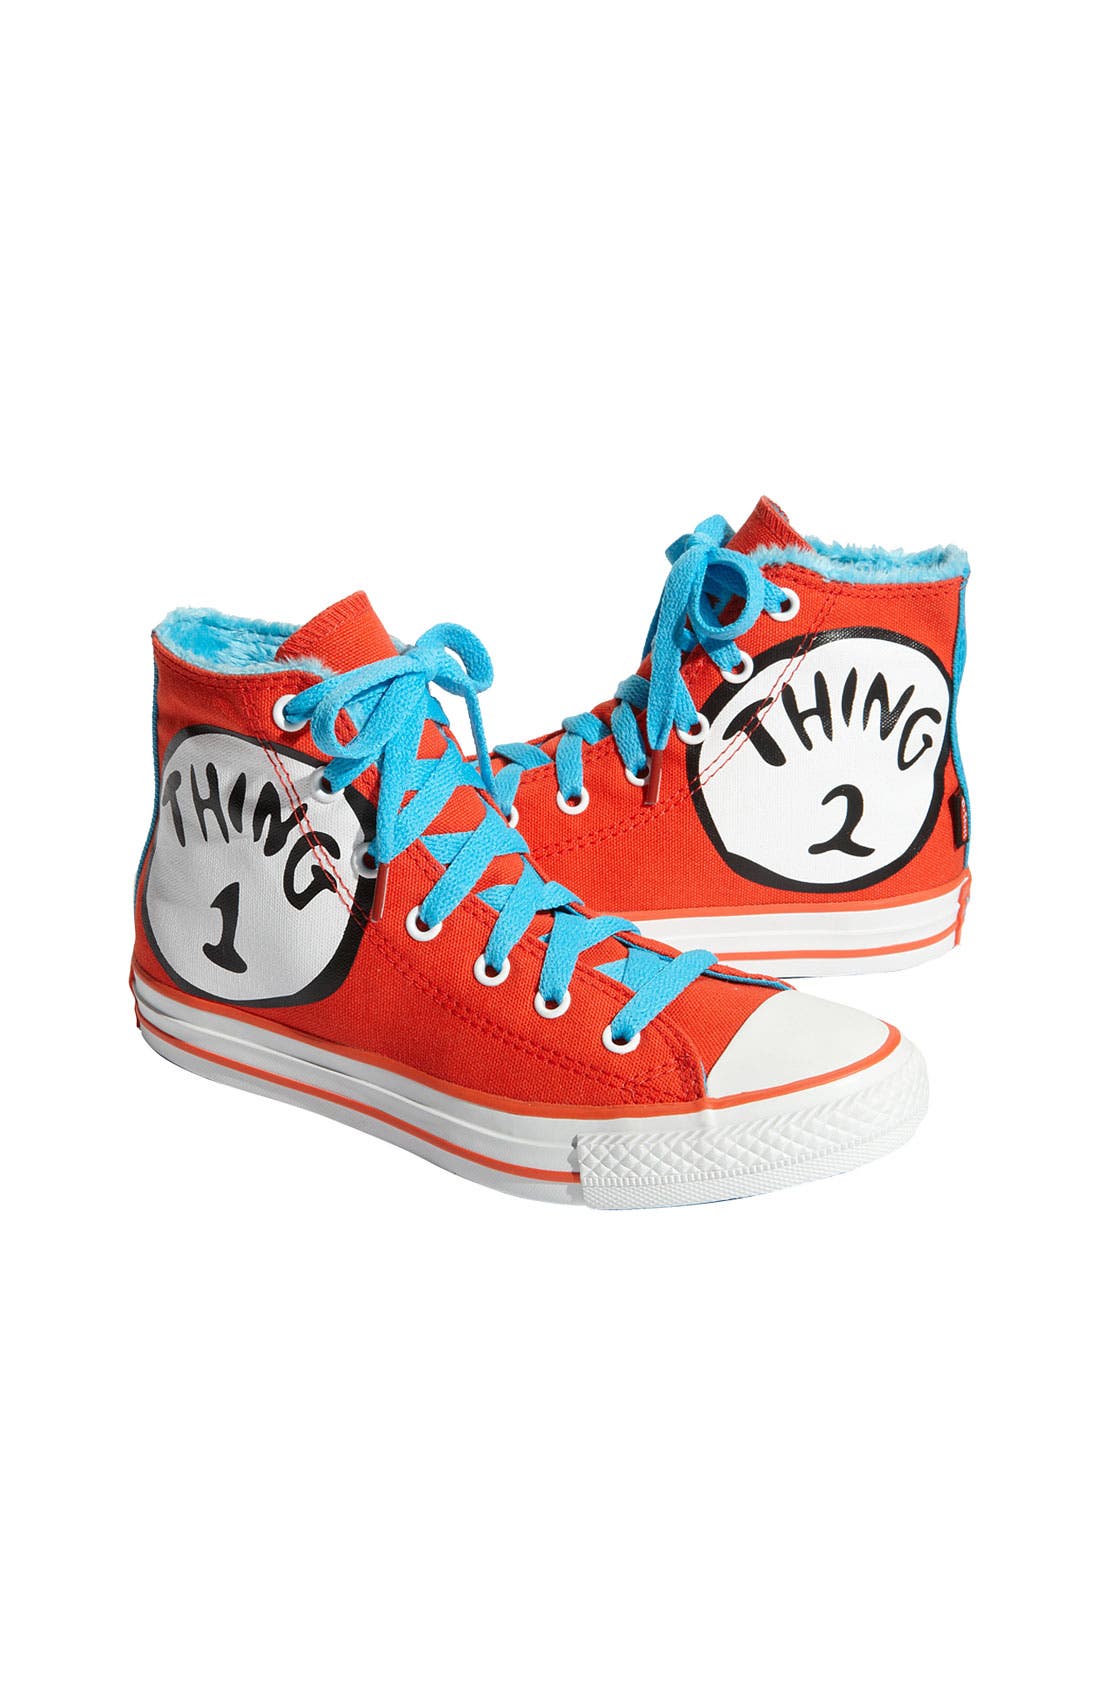 thing 1 and thing 2 shoes converse